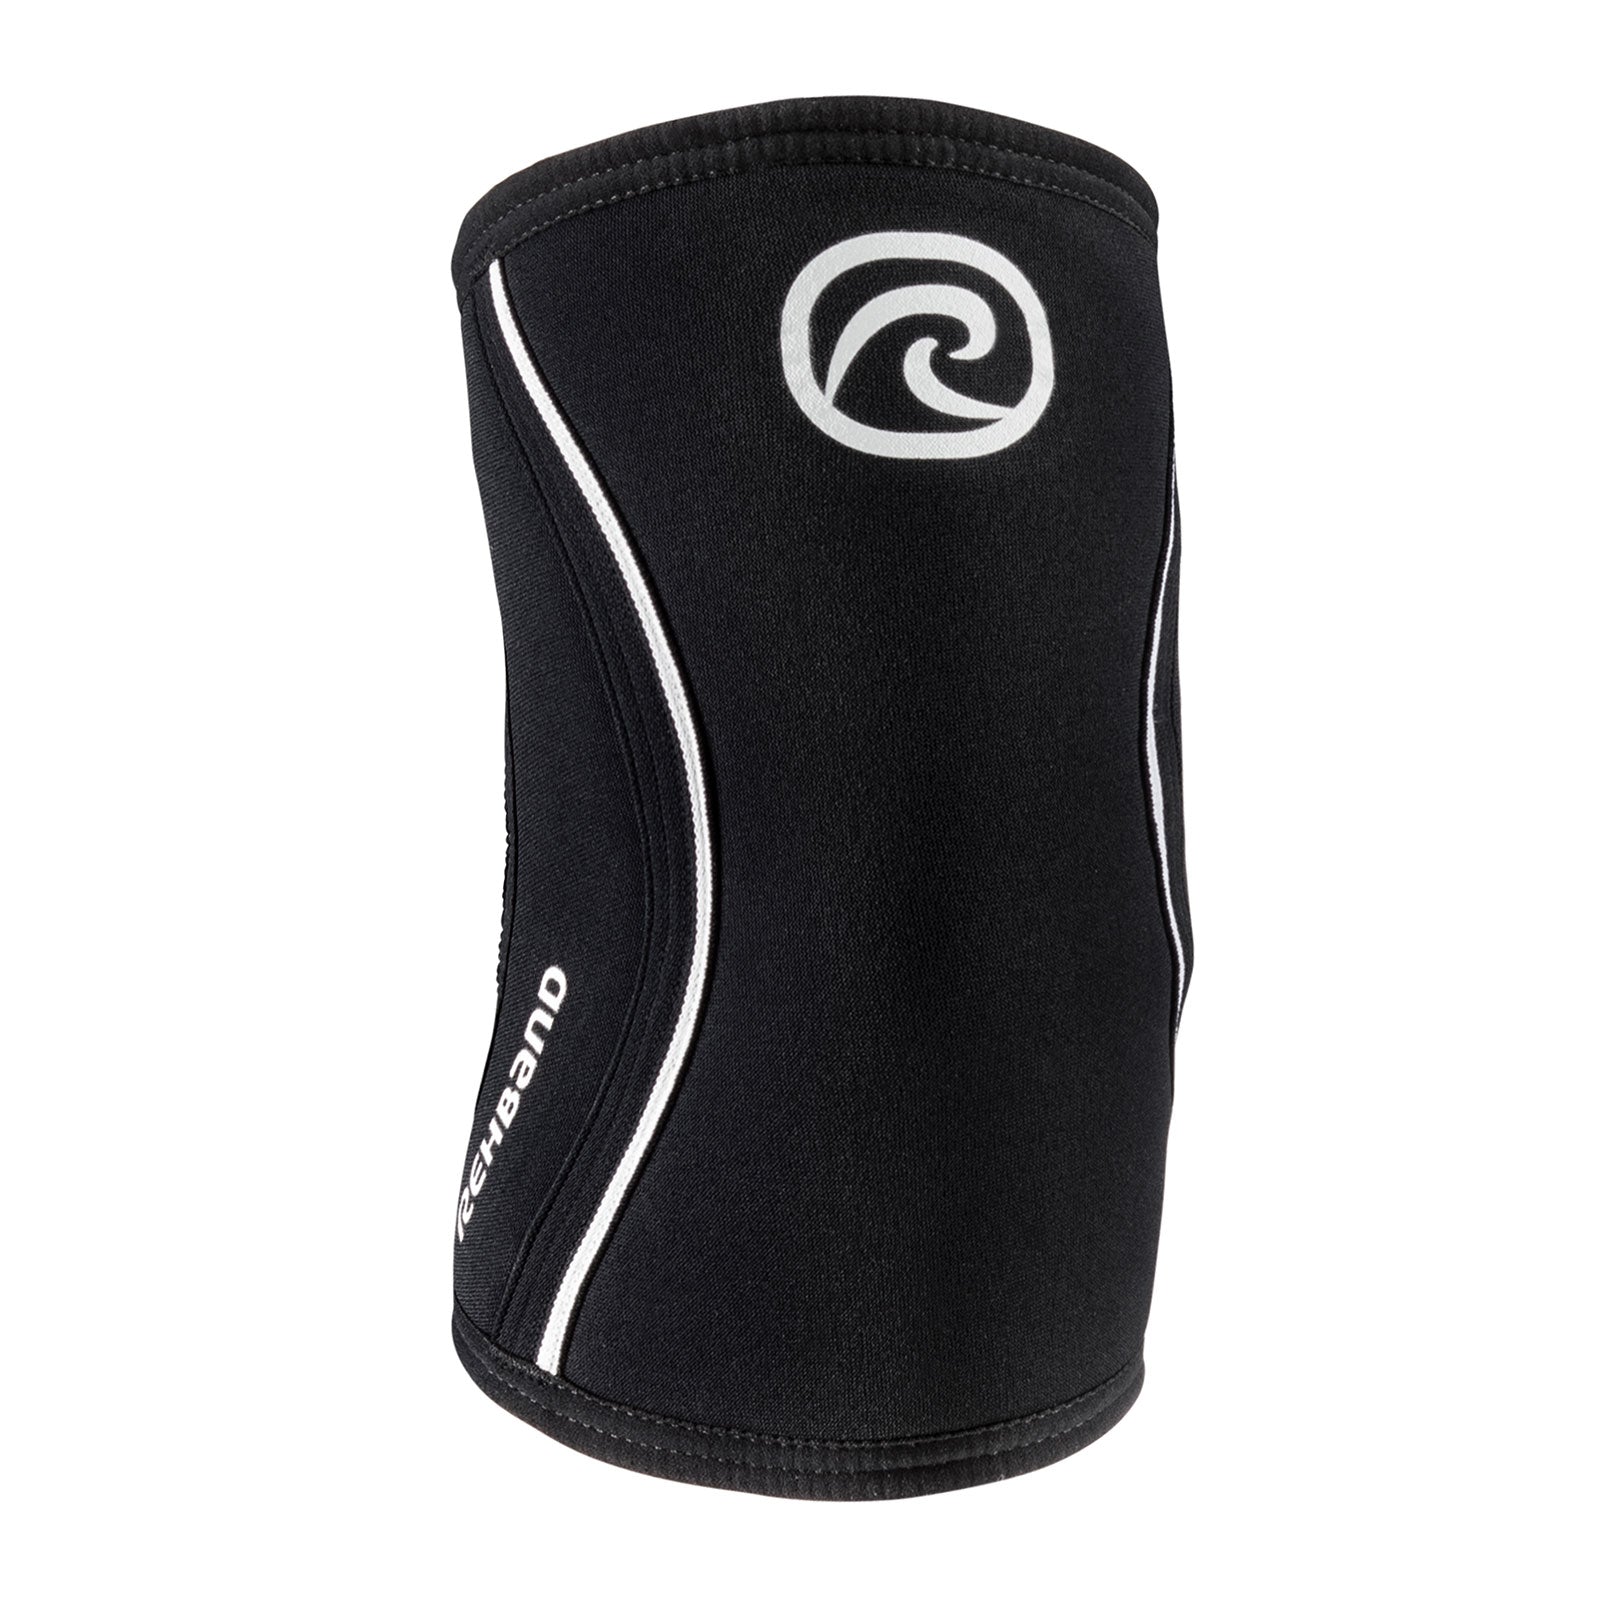 Black elbow sleeve with a white Rehband logo at the top and lettering at the side